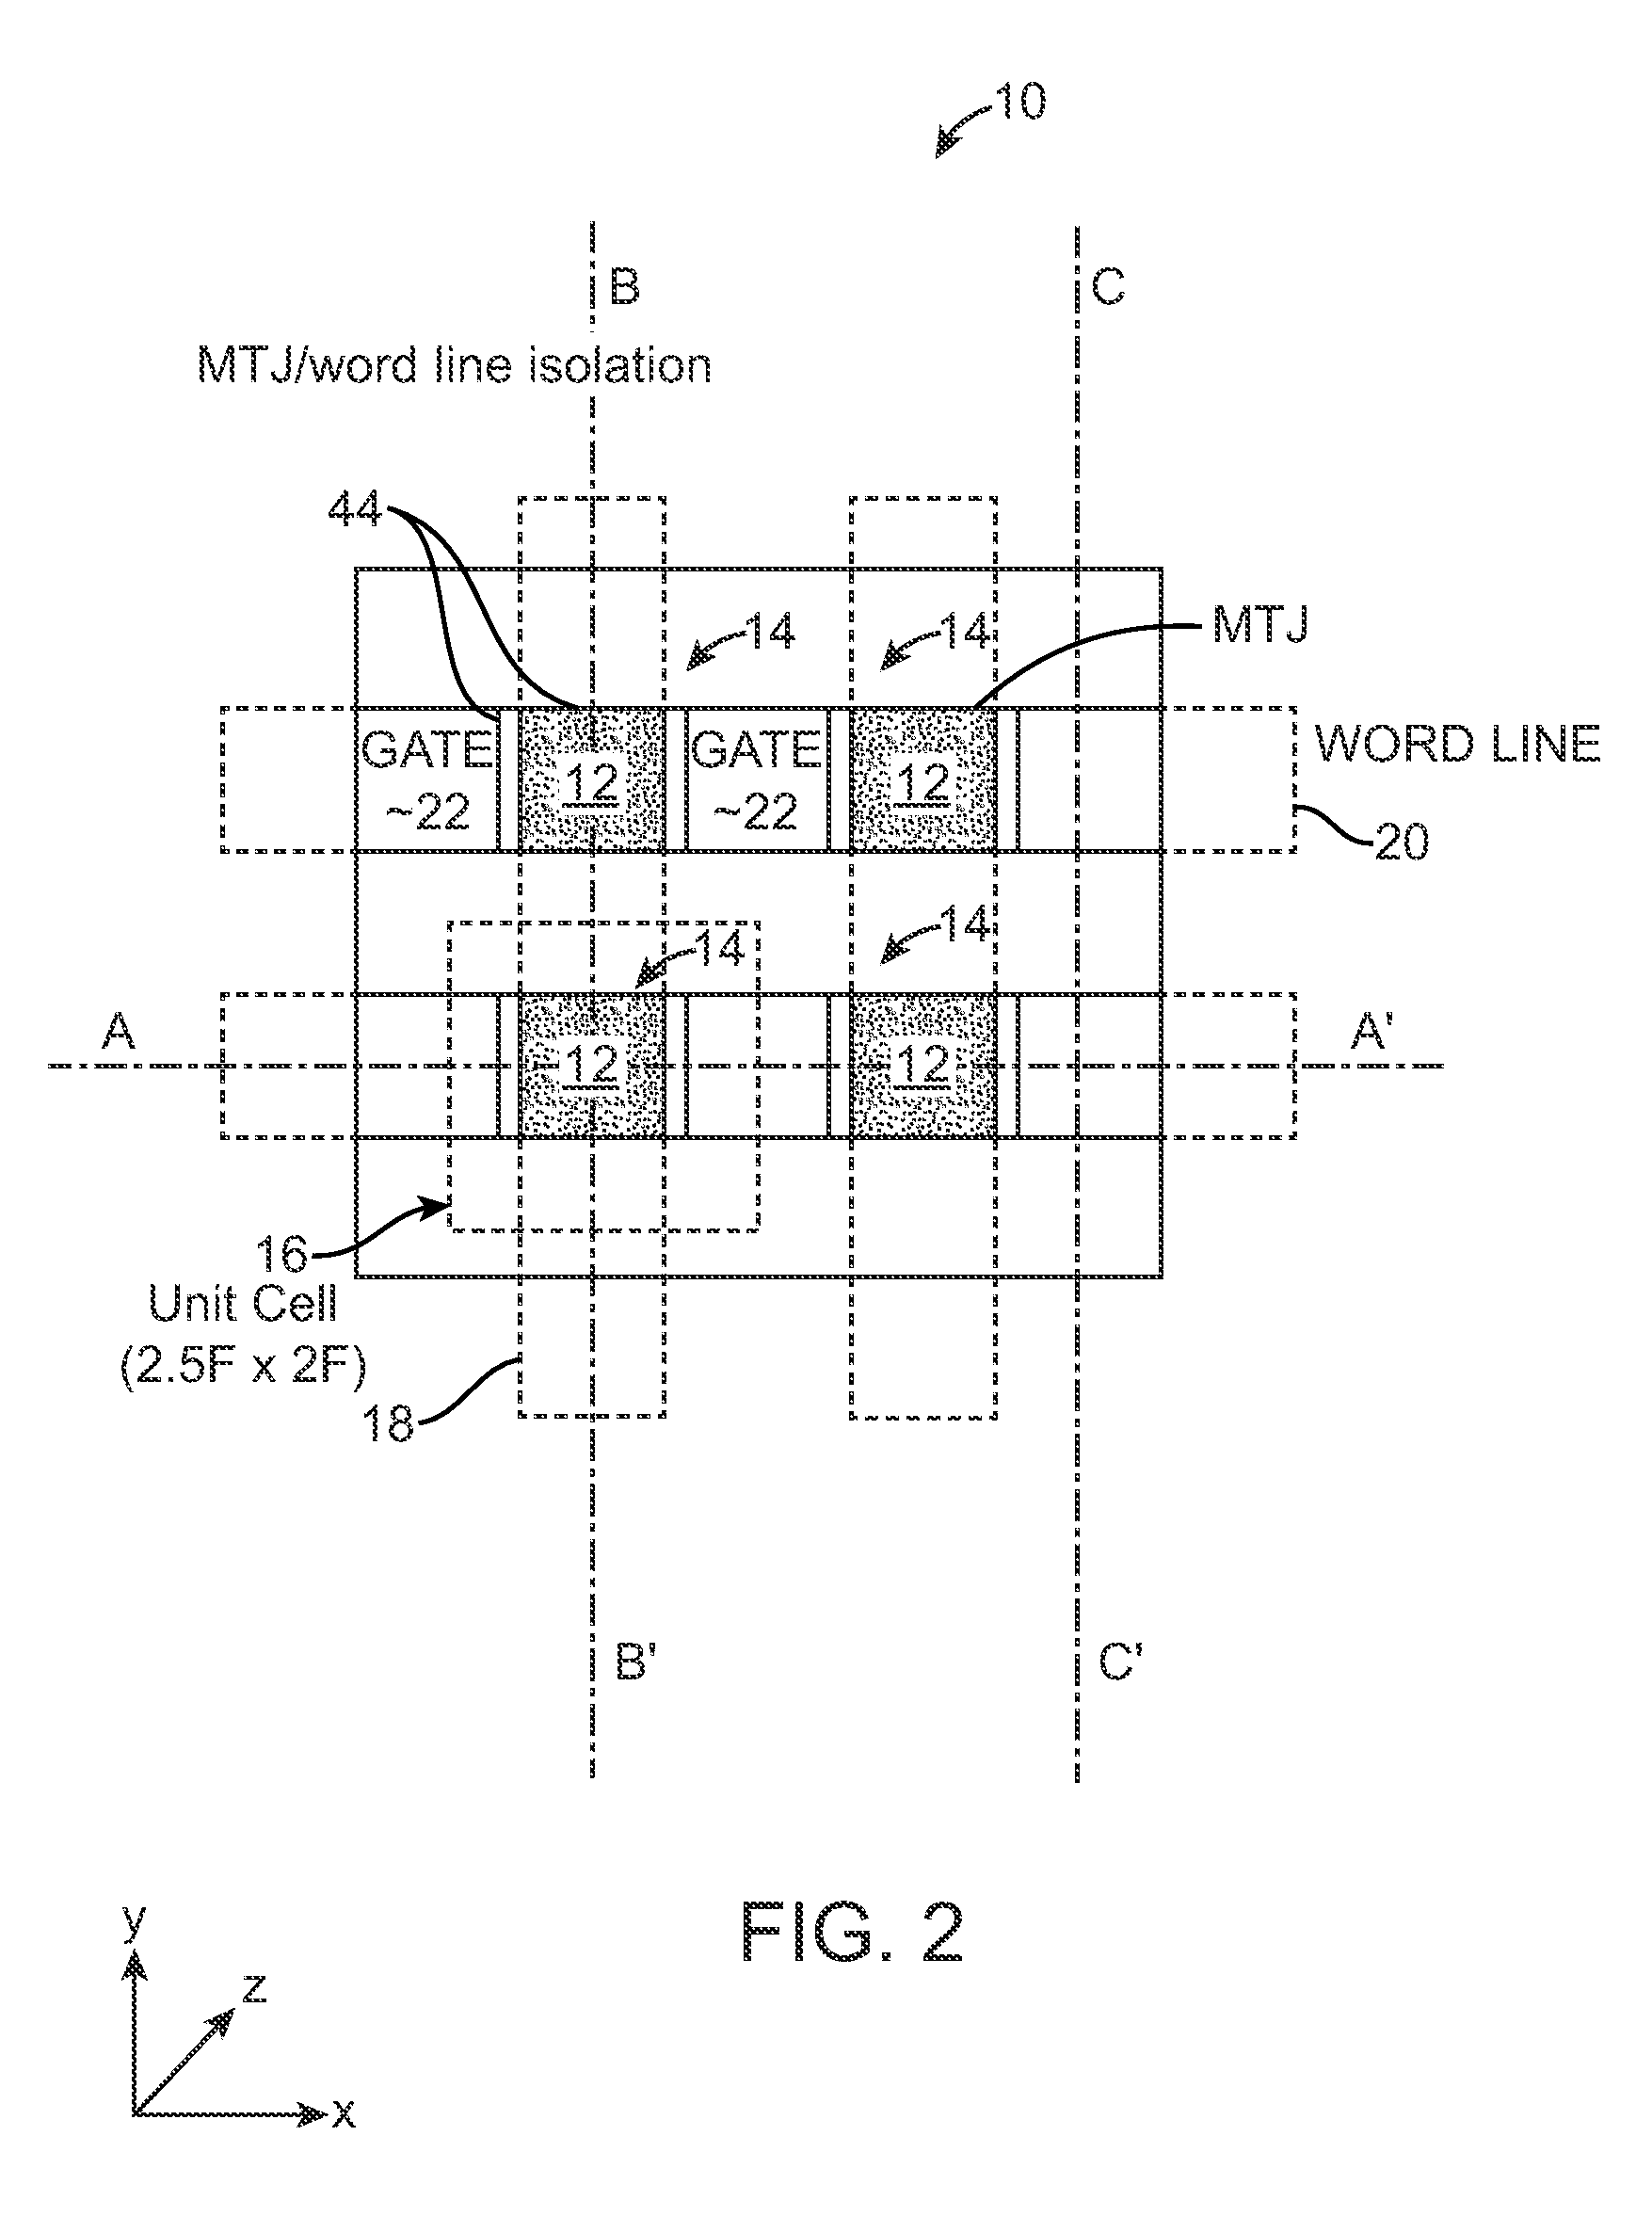 Access transistor with a buried gate